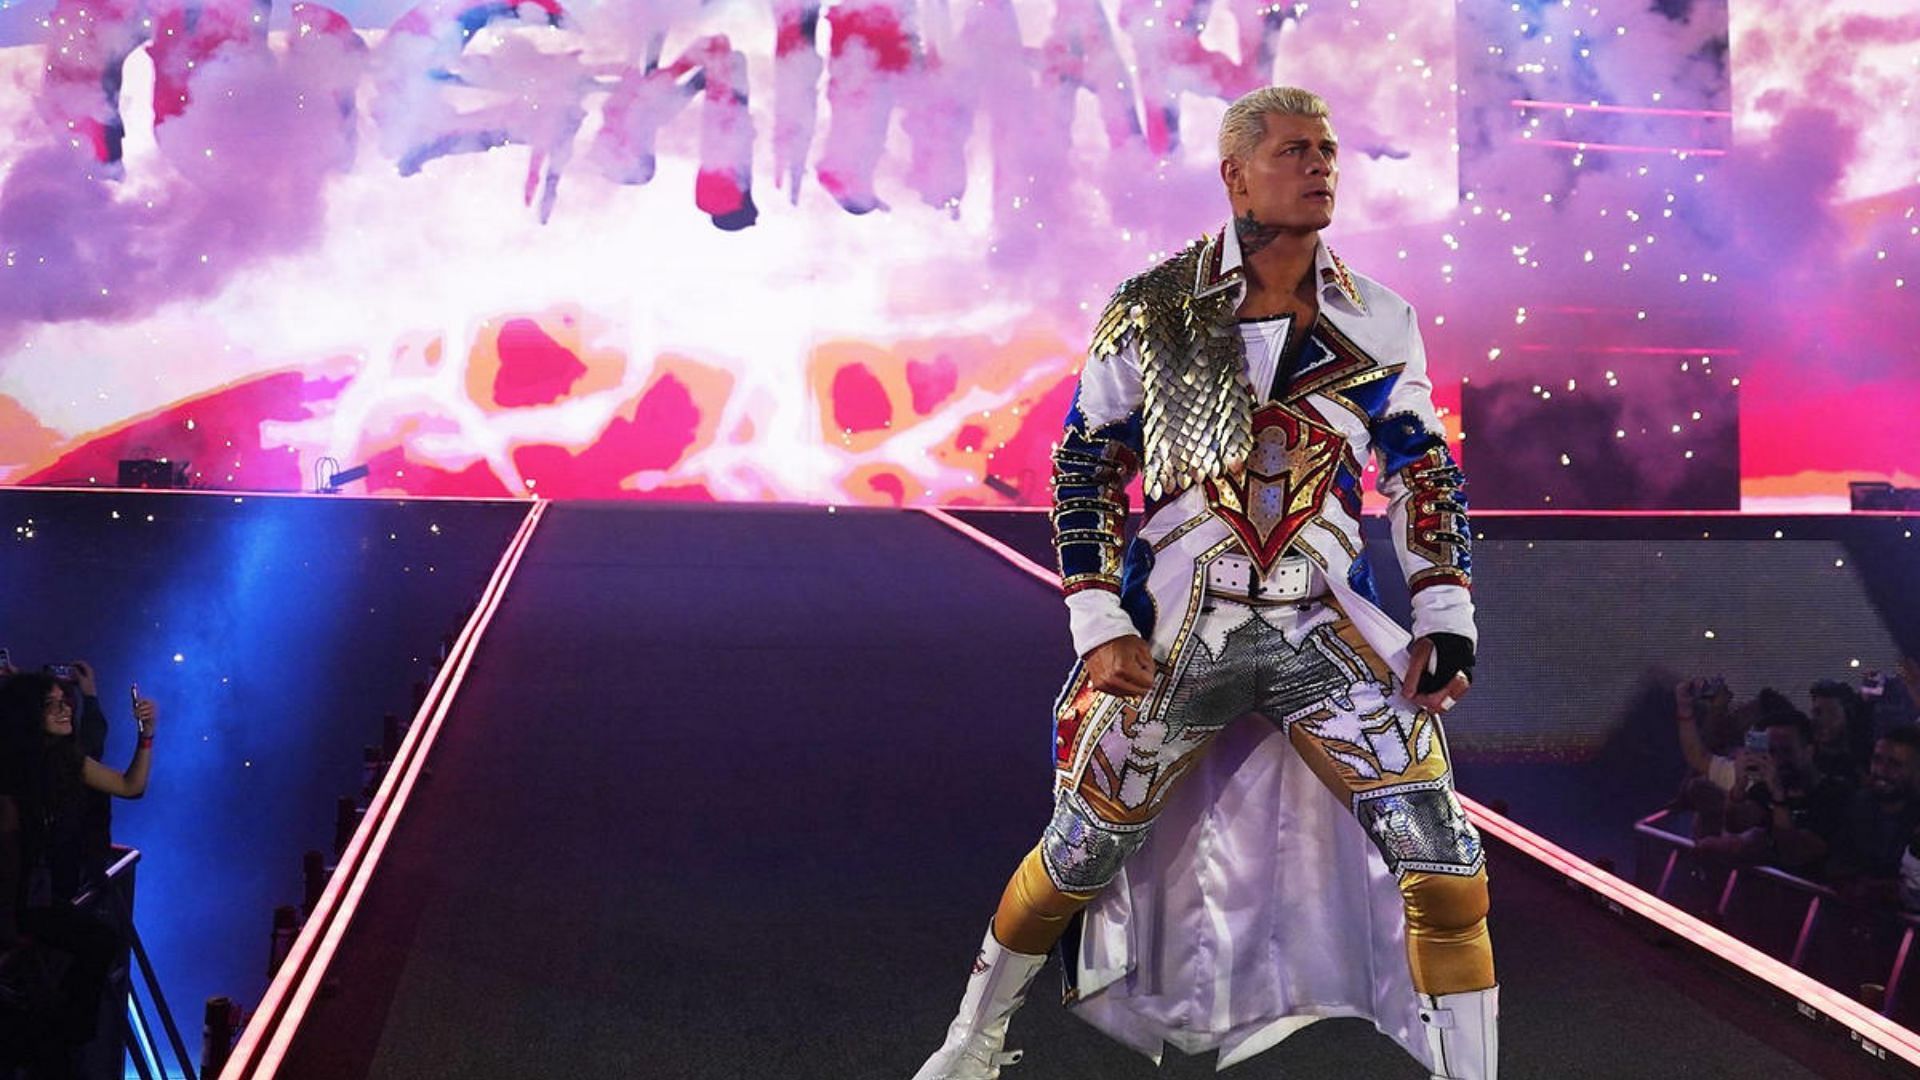 Why did 56-year-old legend cut a savage promo on Cody Rhodes on WWE RAW? Exploring potential direction